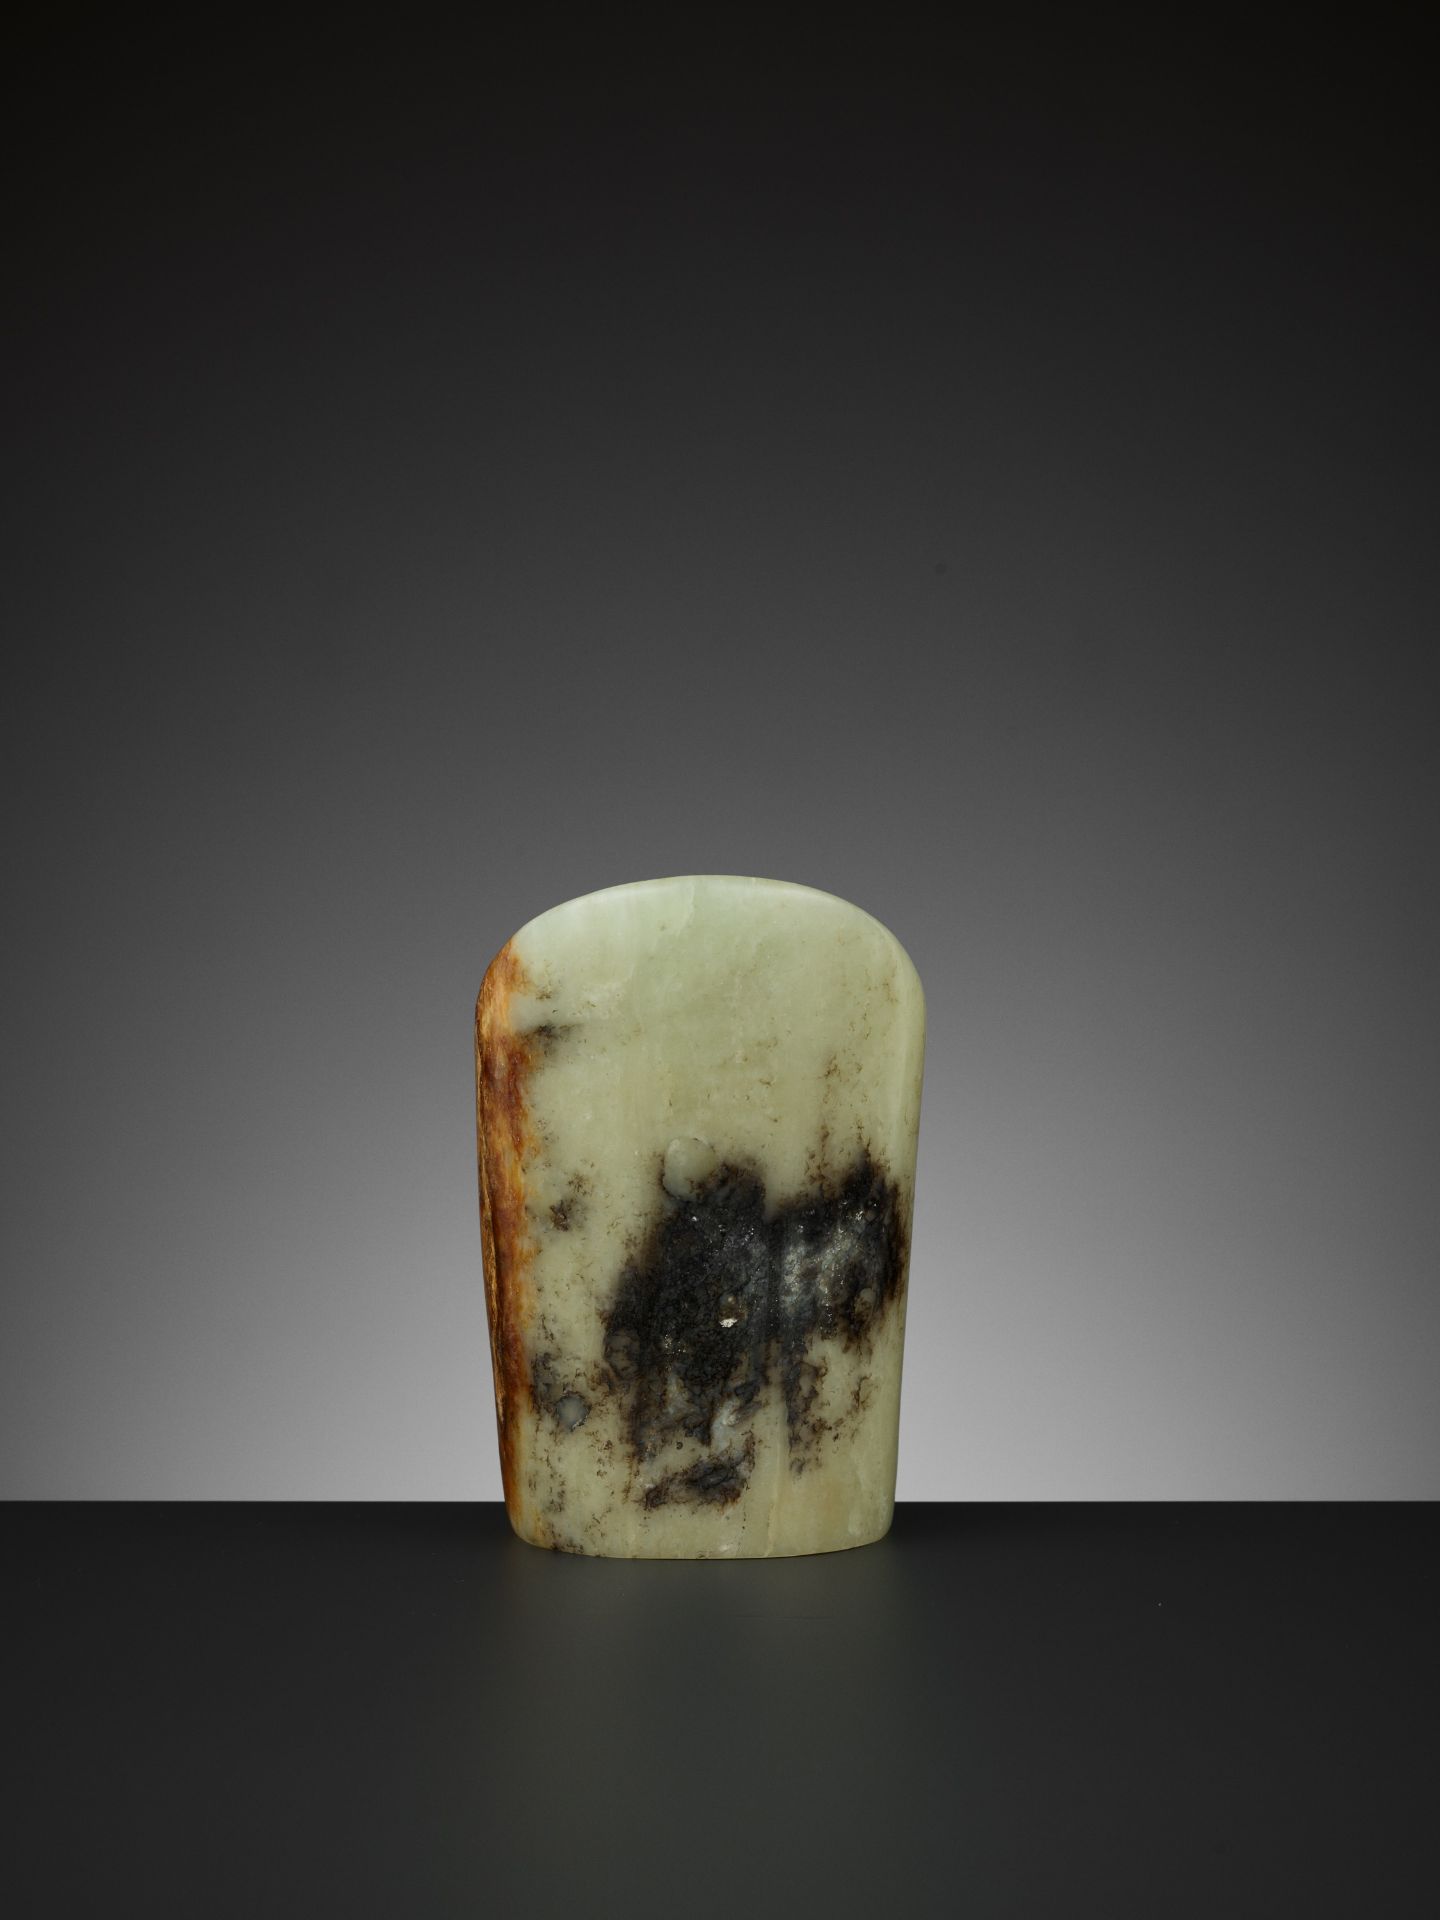 A PALE YELLOW AND RUSSET JADE HOOF-SHAPED ORNAMENT, HONGSHAN - Image 6 of 13